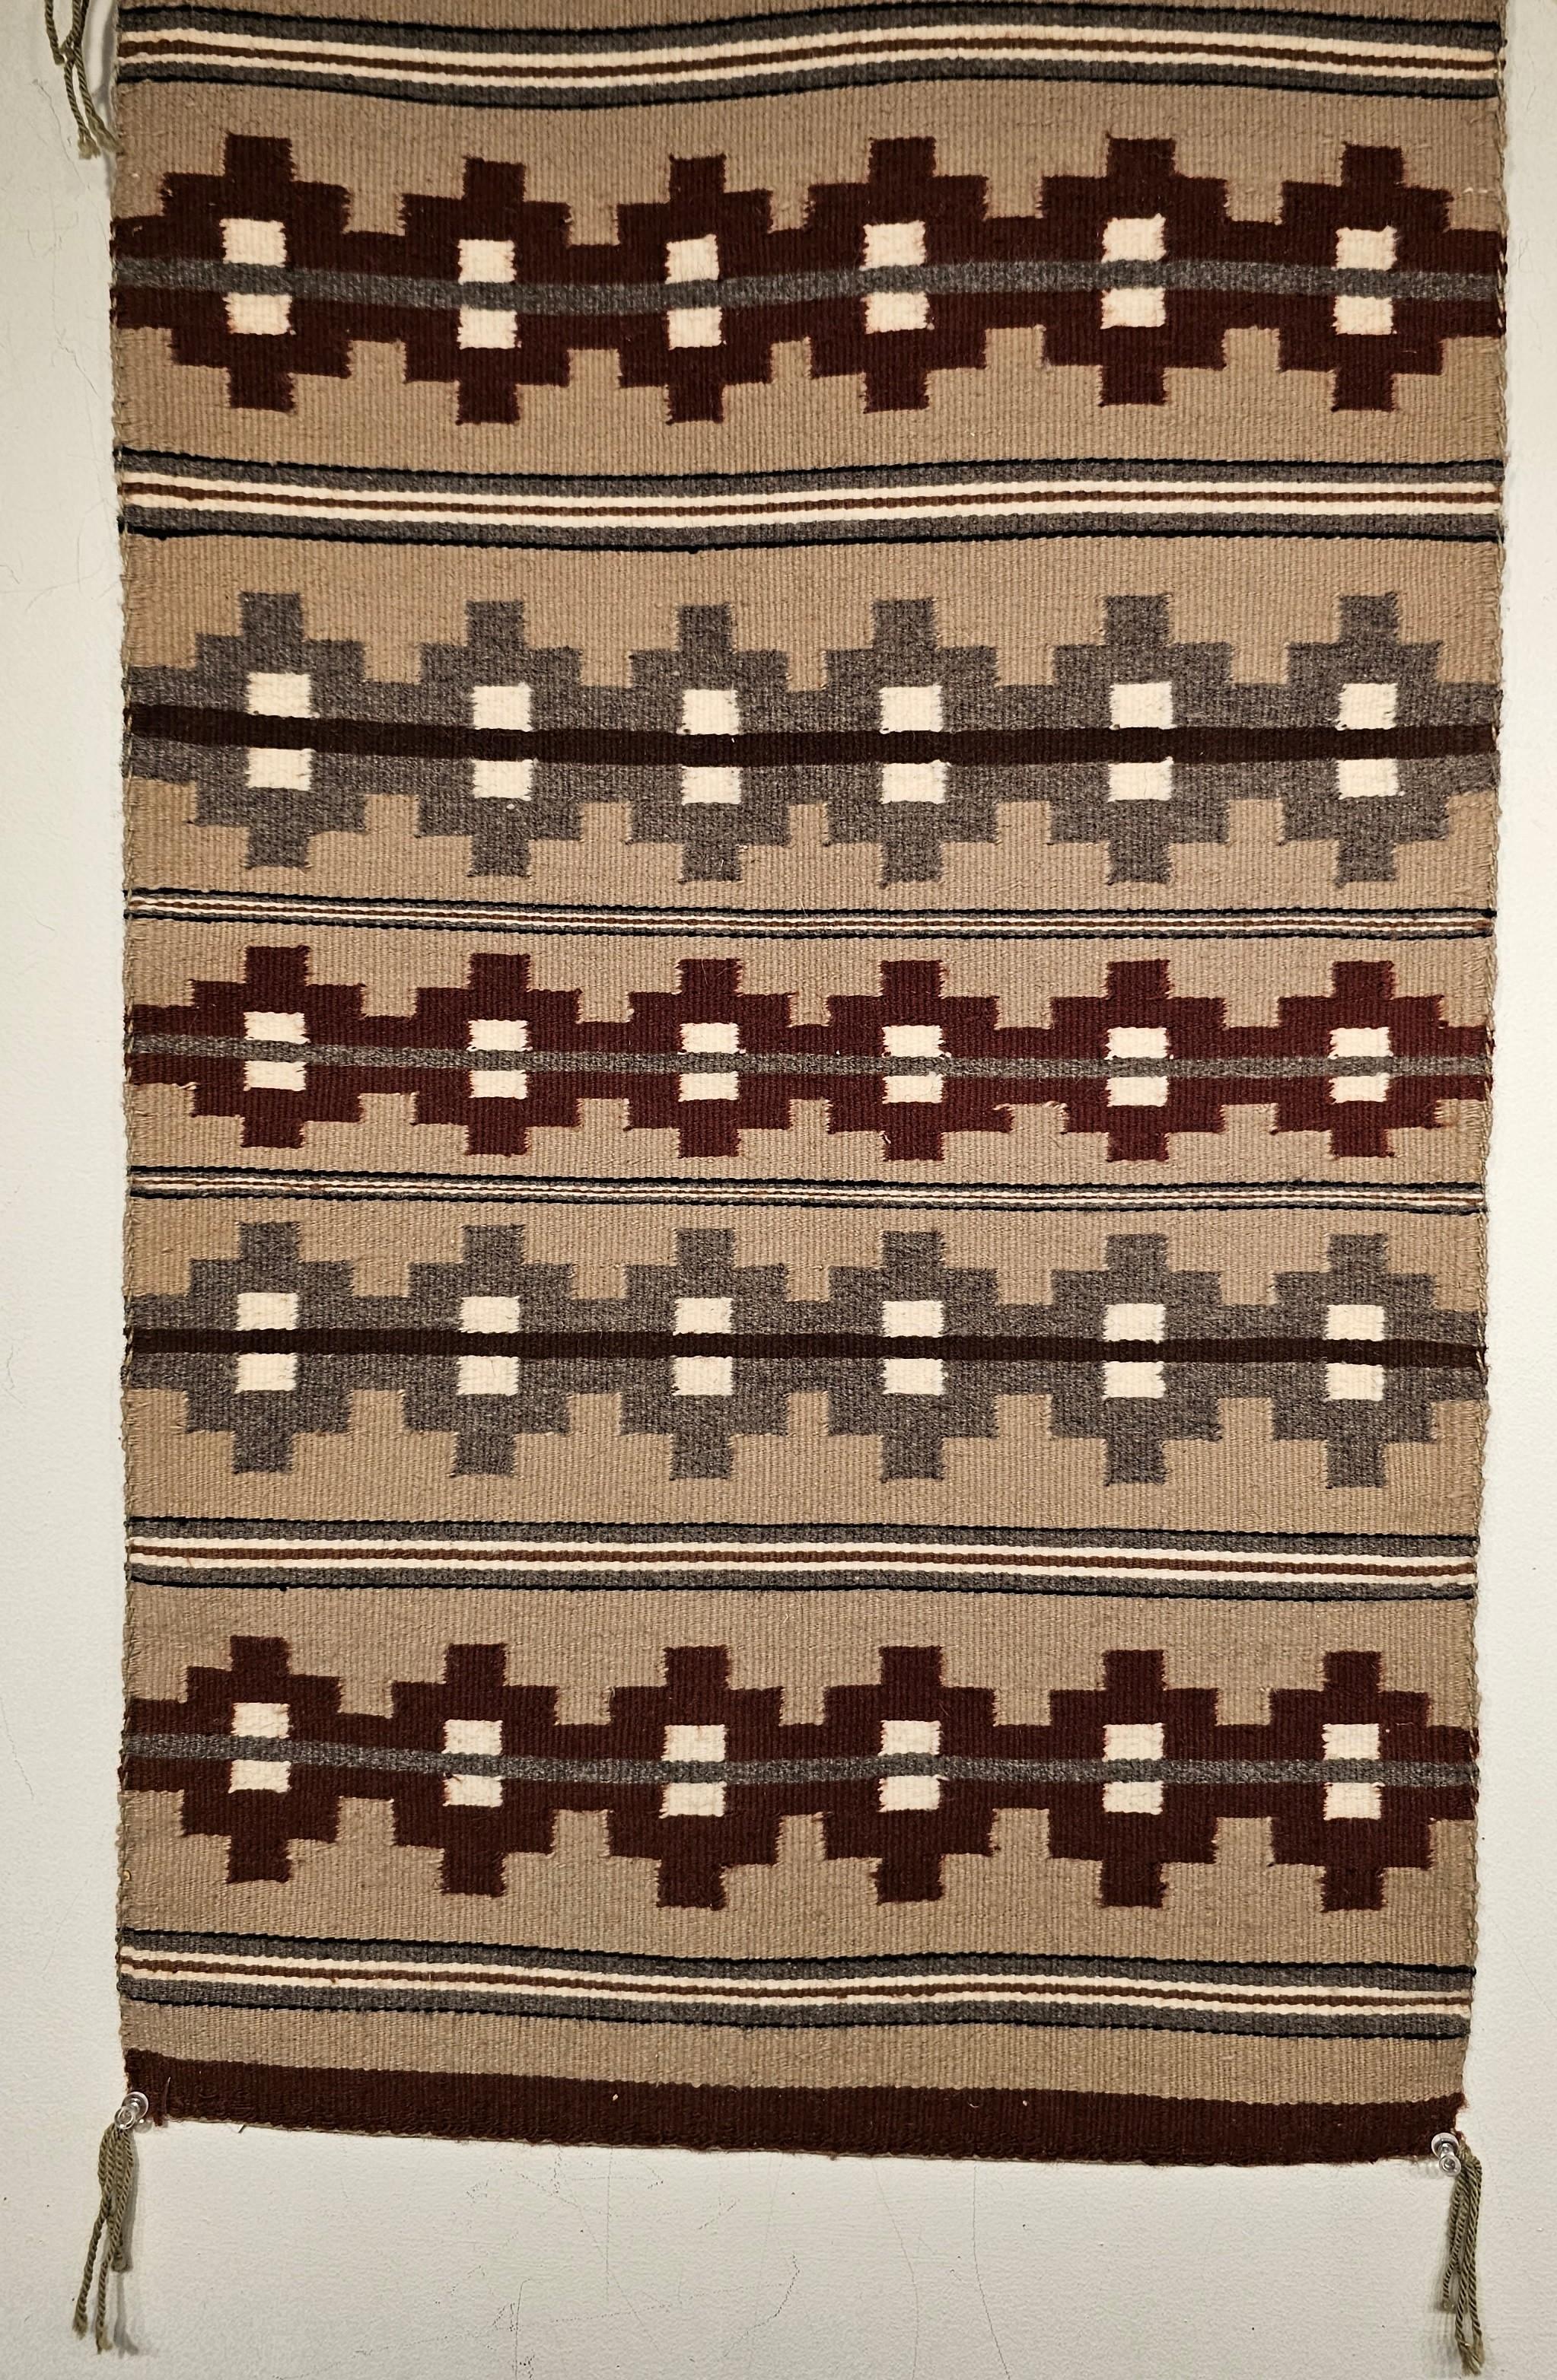 Vintage Navajo area rug with a very fine weave in a banded and stripe pattern with natural earth tones including gray, ivory, black, and caramel from the 3rd quarter of the 1900s.    The rug contains major bands with geometric design in burgundy and